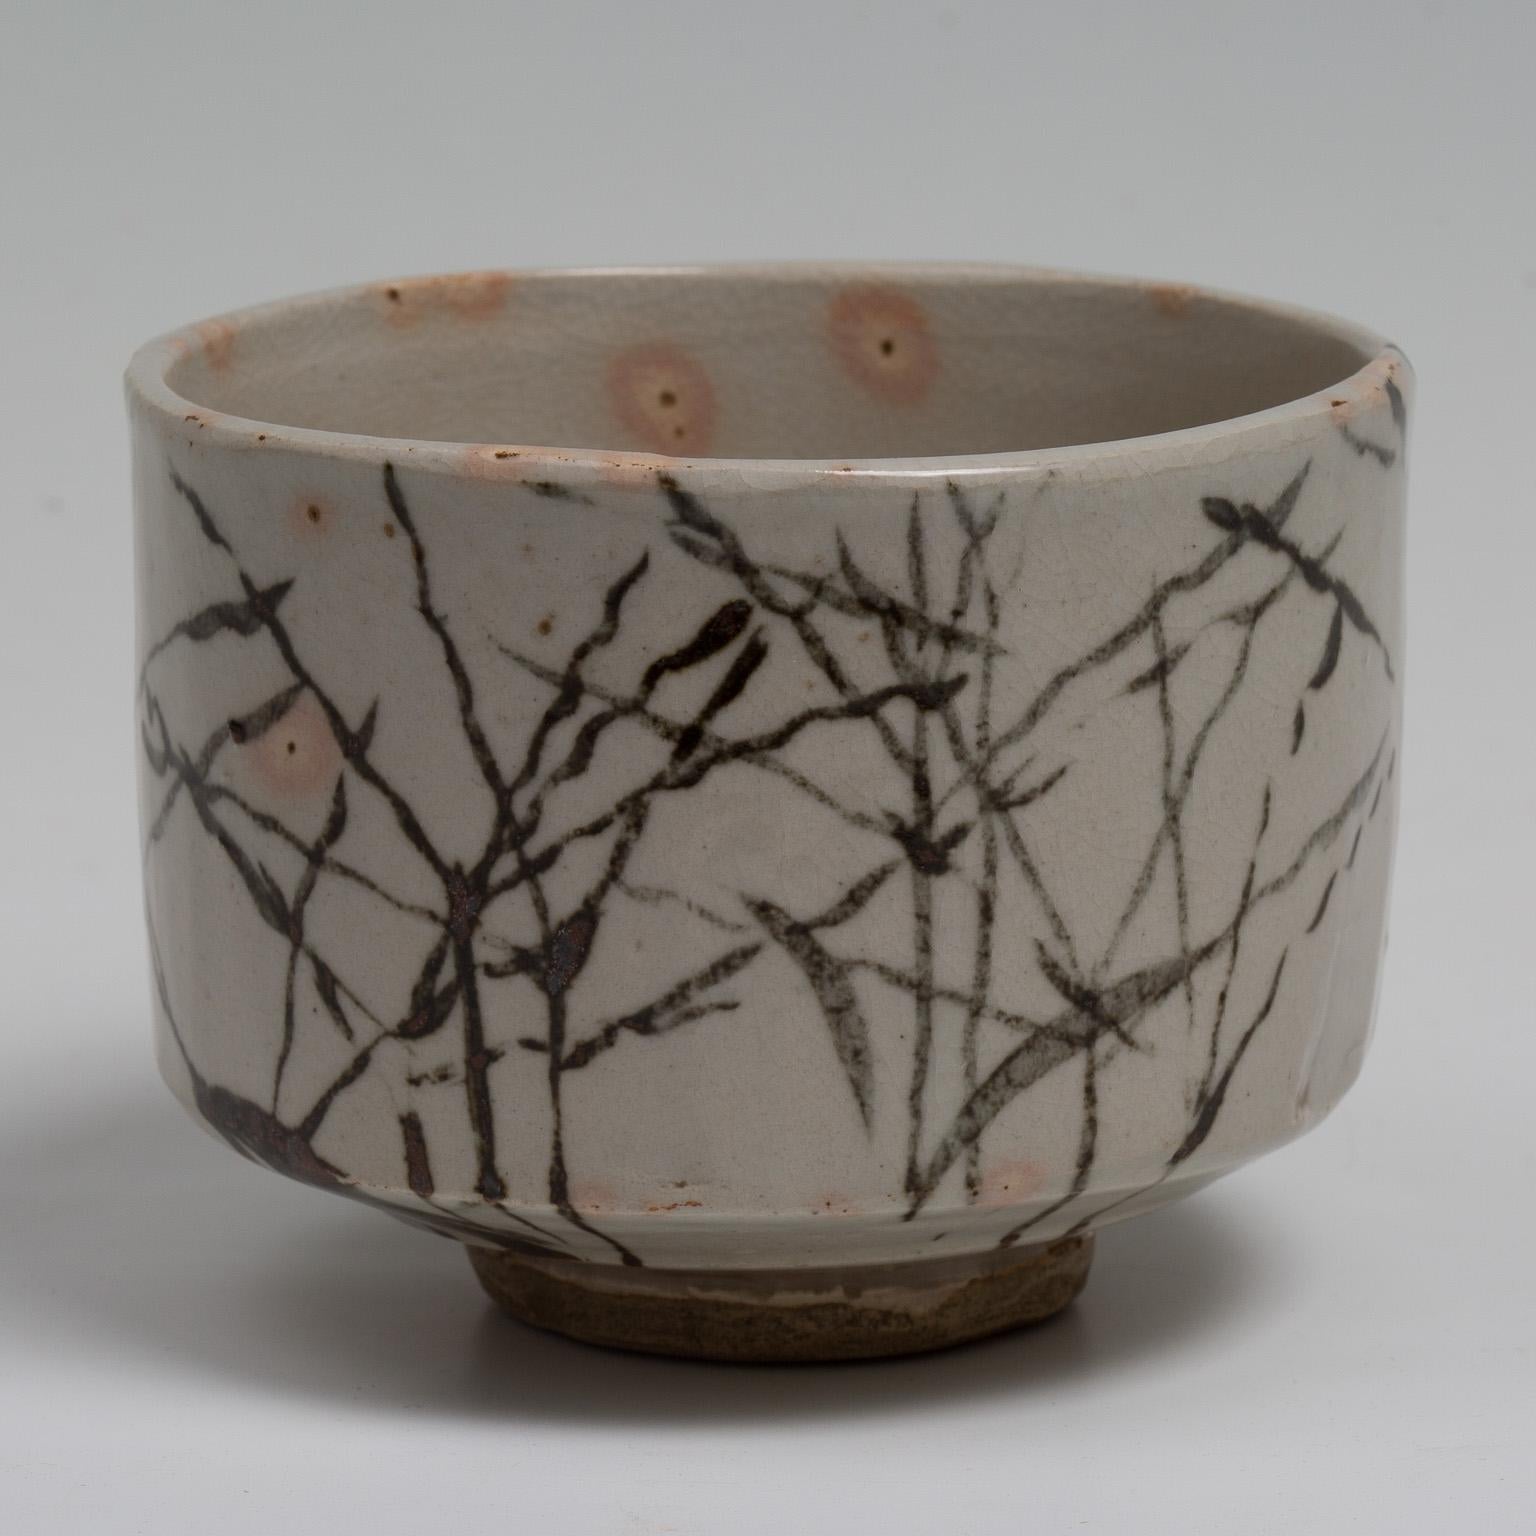 A ceramic tea bowl decorated with autumn grasses with signed and sealed tomobako.
Painter and designer, Kamisaka Sekka (Japan, 1866-1942) has been one of the most important Japanese artists who brought the traditional aesthetic in the western